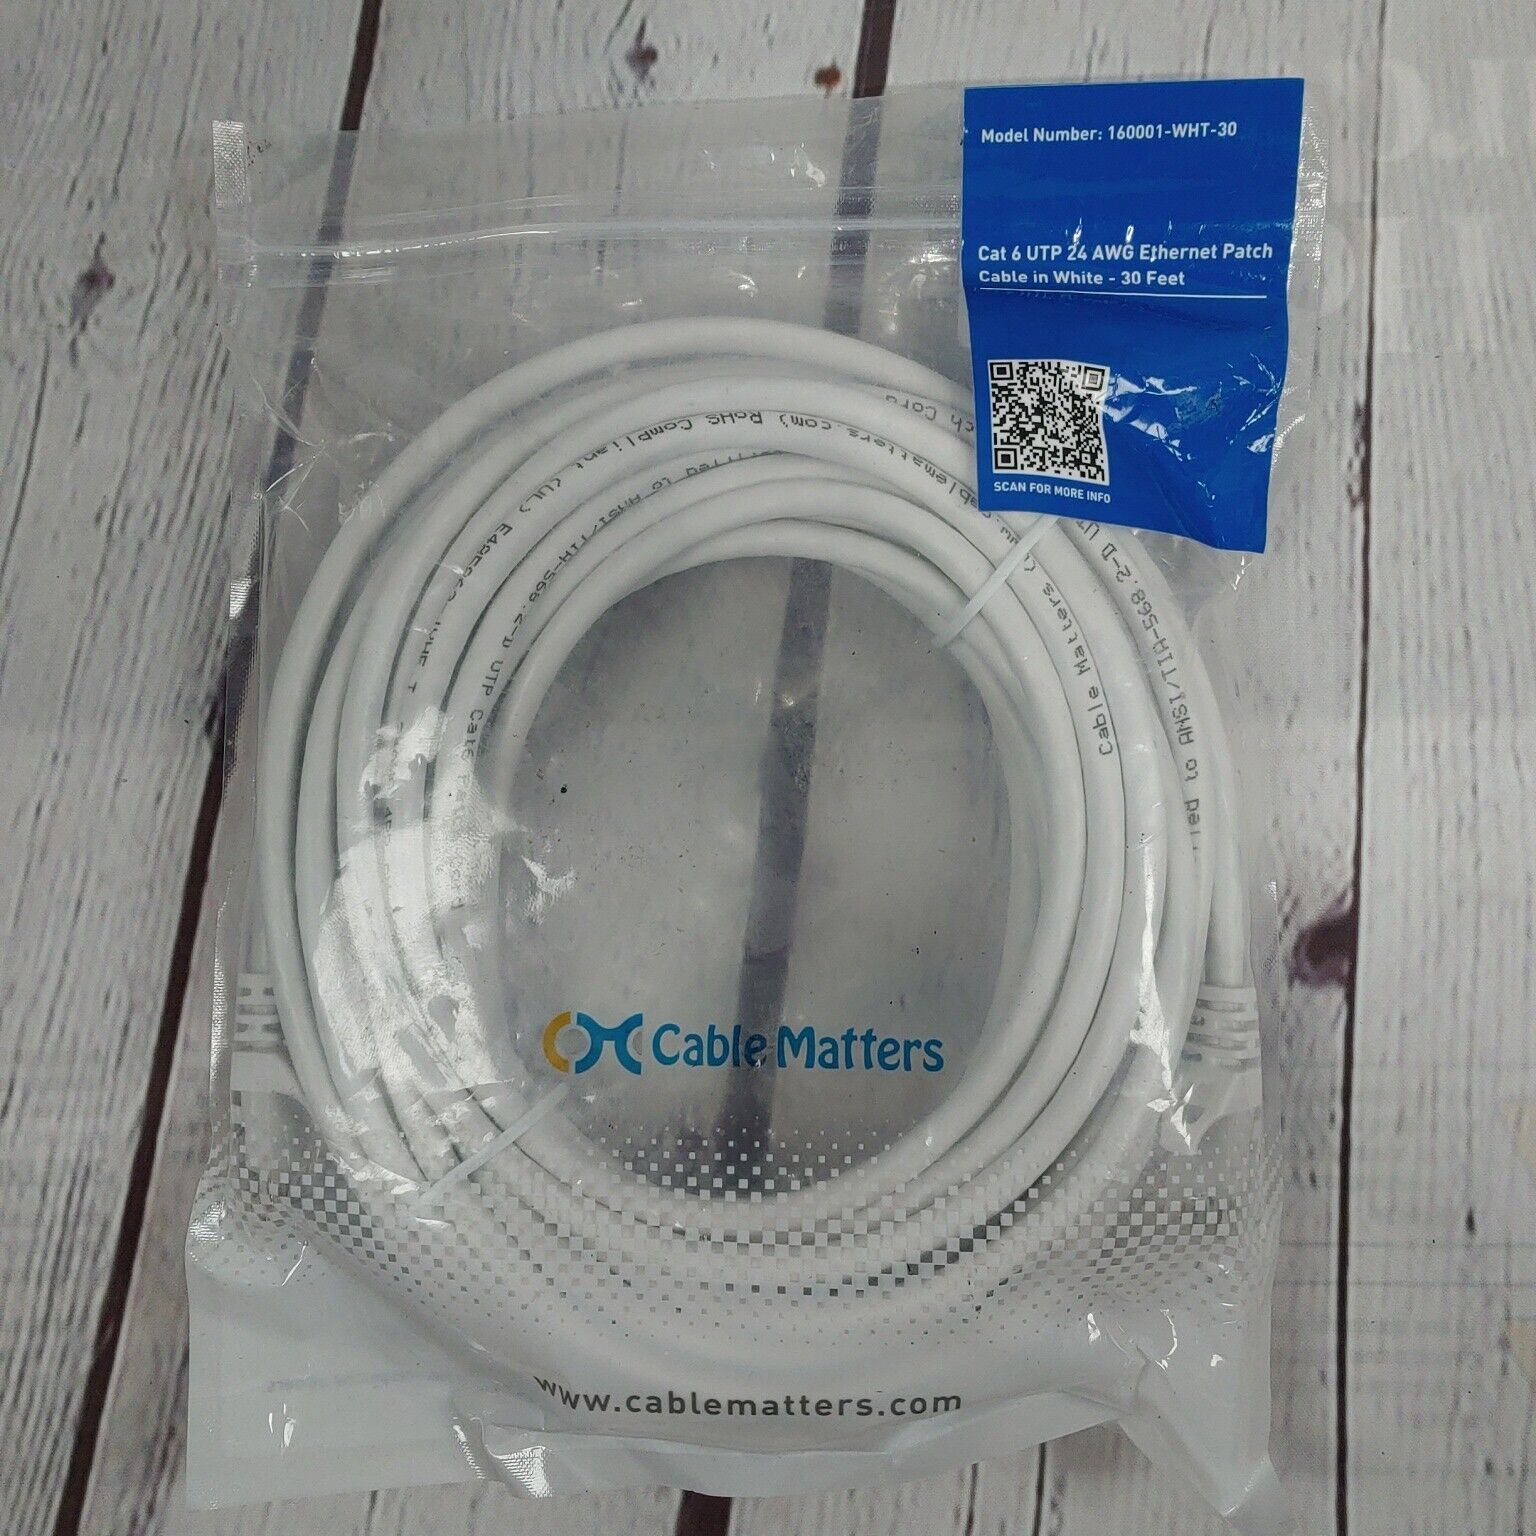 Cable Matters 160001-WHT-30 White Cat 6 UTP 24 AWG Ethernet Patch Cable 30 Feet